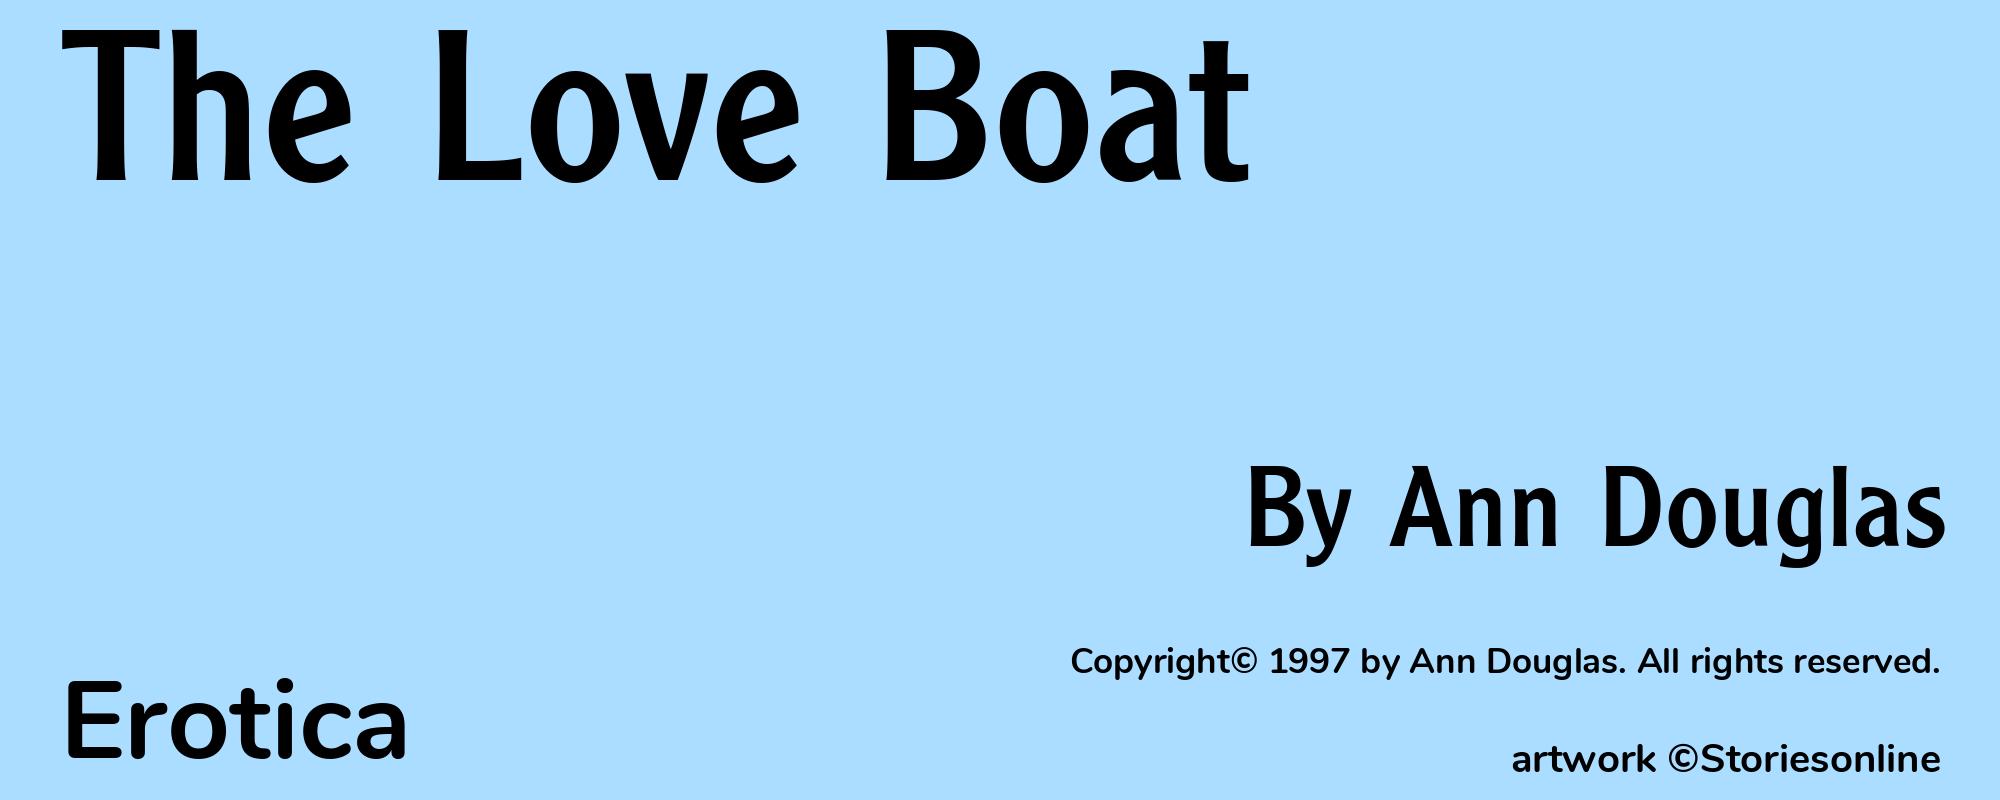 The Love Boat - Cover